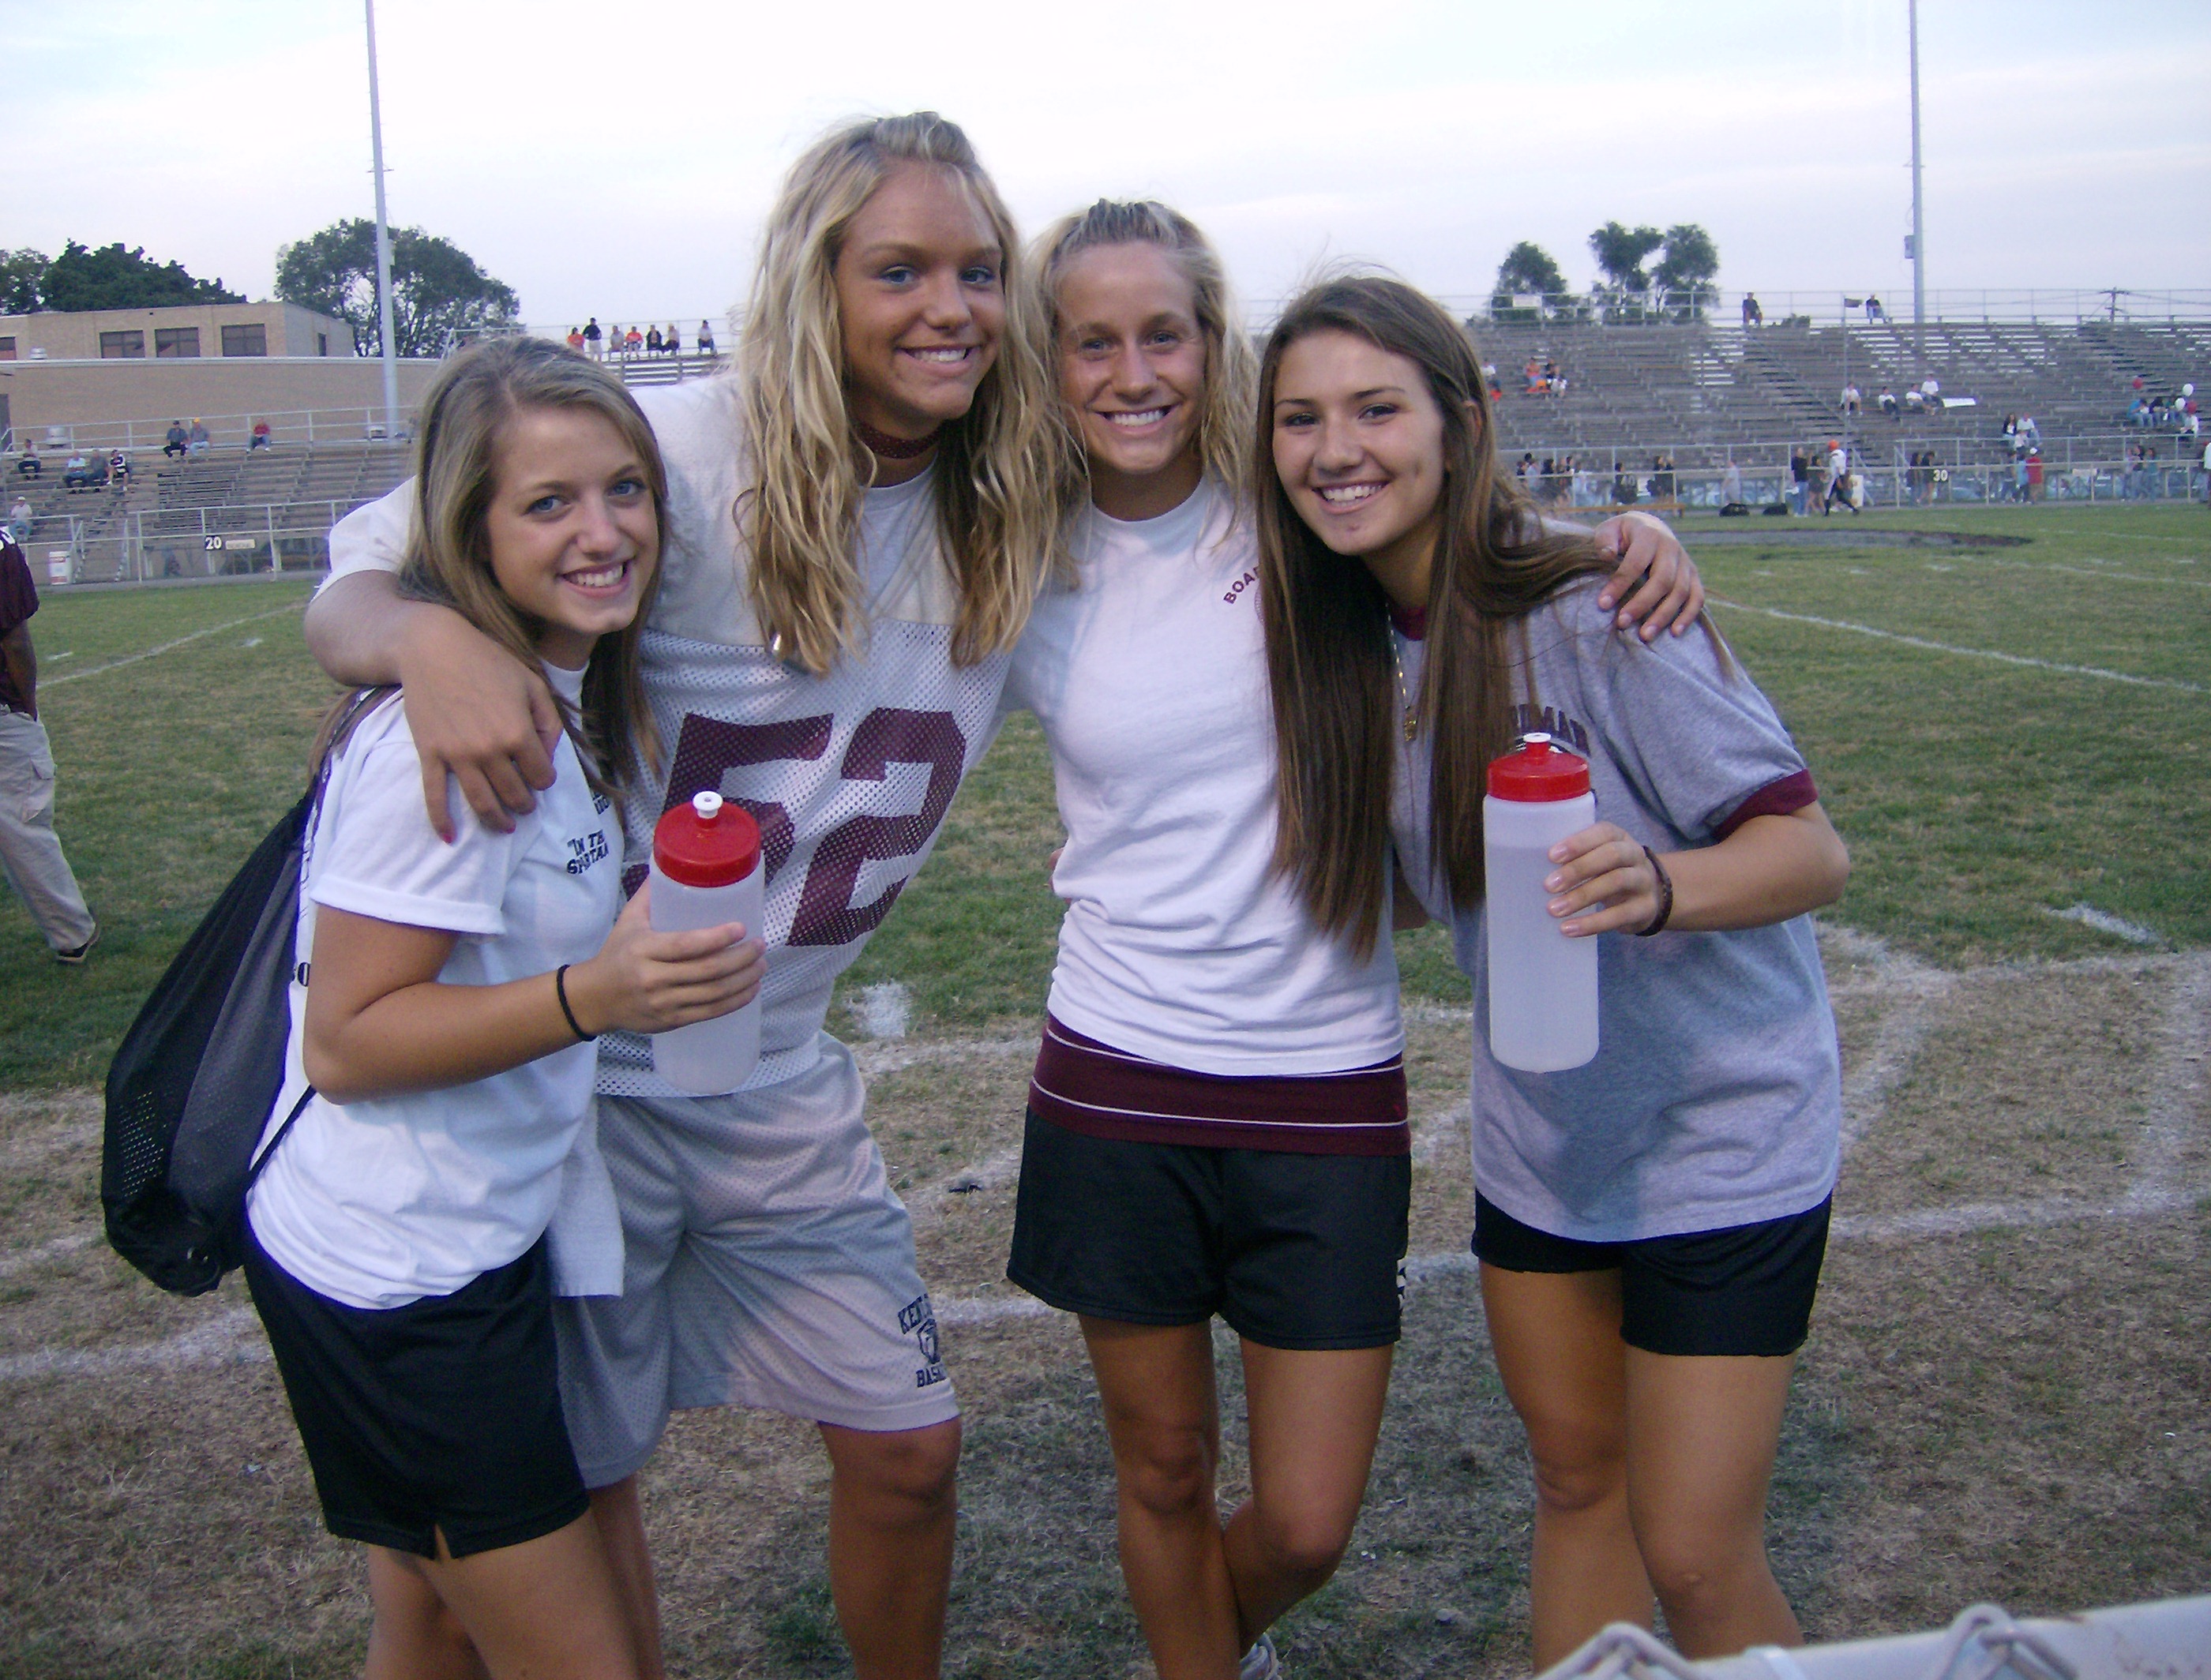 Spartan trainers Courtney Ivan, Courtney Schiffauer, Melanie Sfara, and Monica Touvelle, who all play sports, help out the Football team by filling up the water bottles before the big game.
